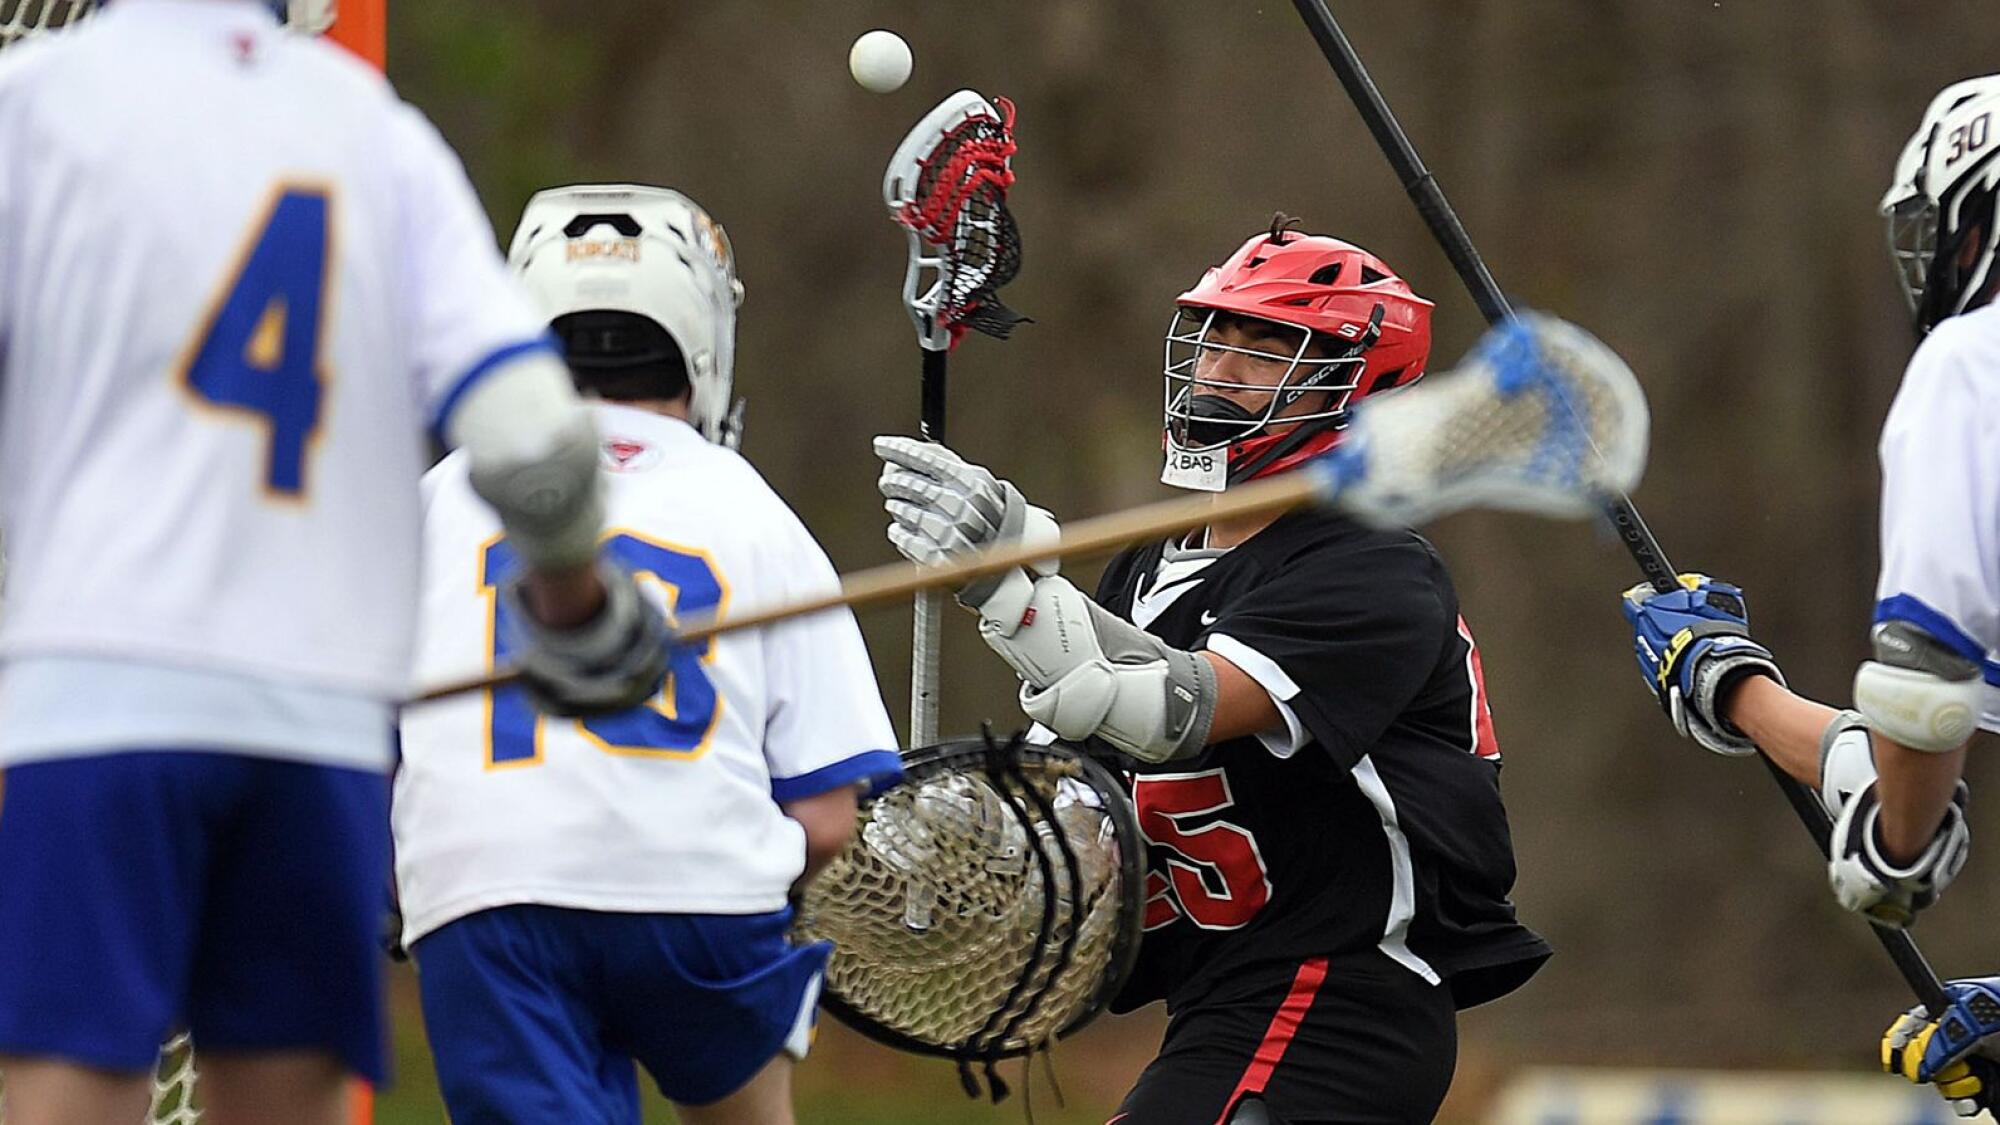 Fitch runs away with a win over Bacon Academy in boys lacrosse